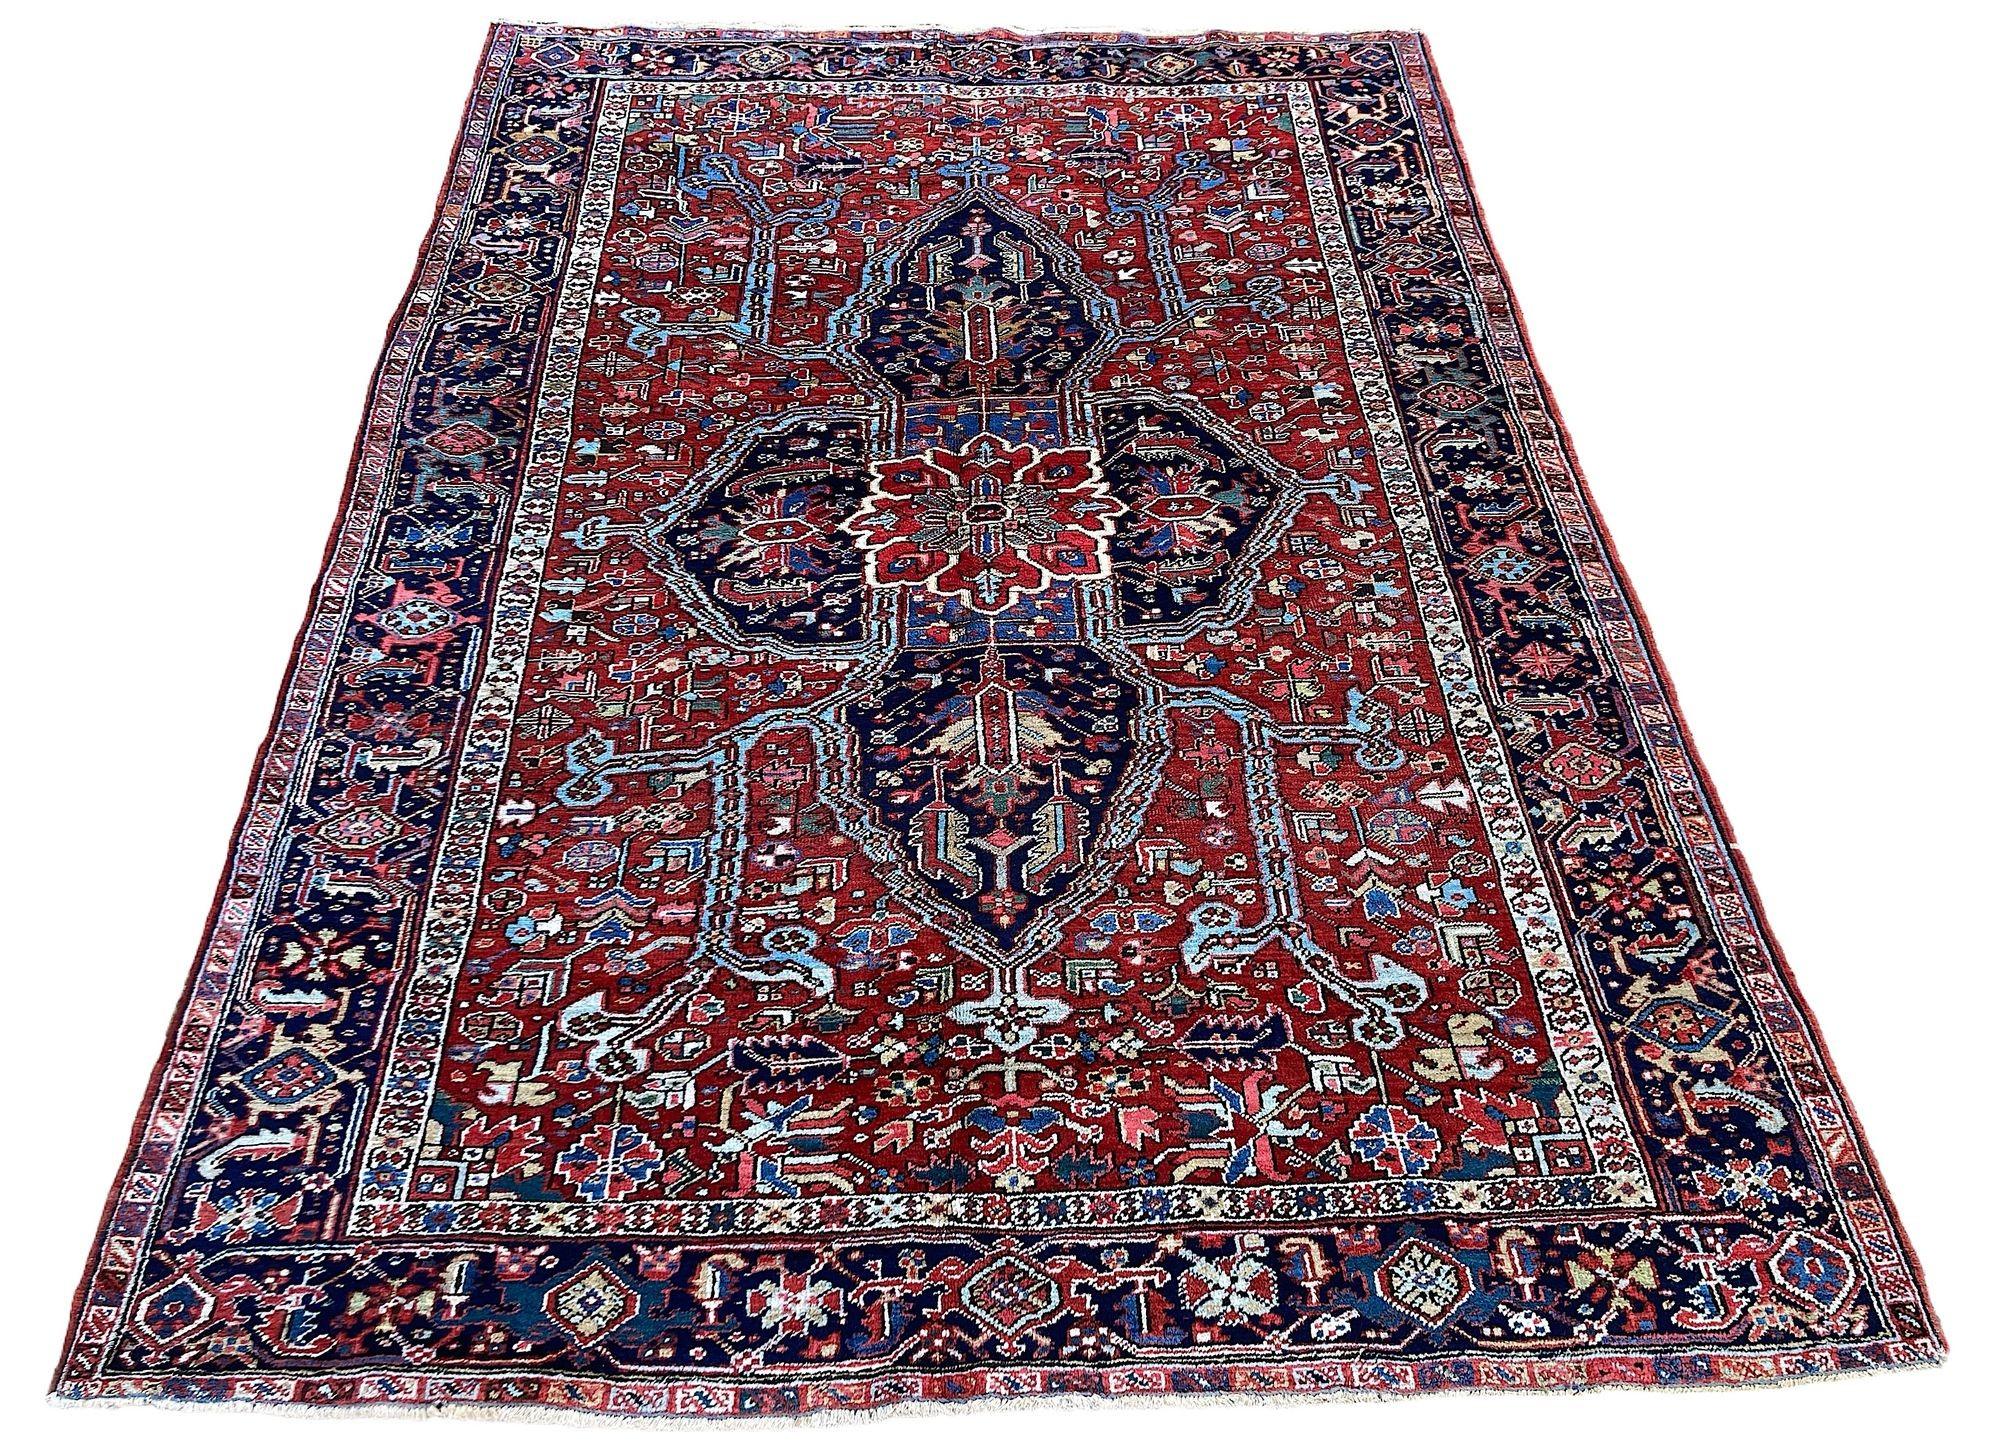 A wonderful antique Heriz carpet, hand woven circa 1920. The design features an unusual geometrical central medallion surrounded by stylised flowers and vines on a rich terracotta field and indigo border. A very decorative carpet with great